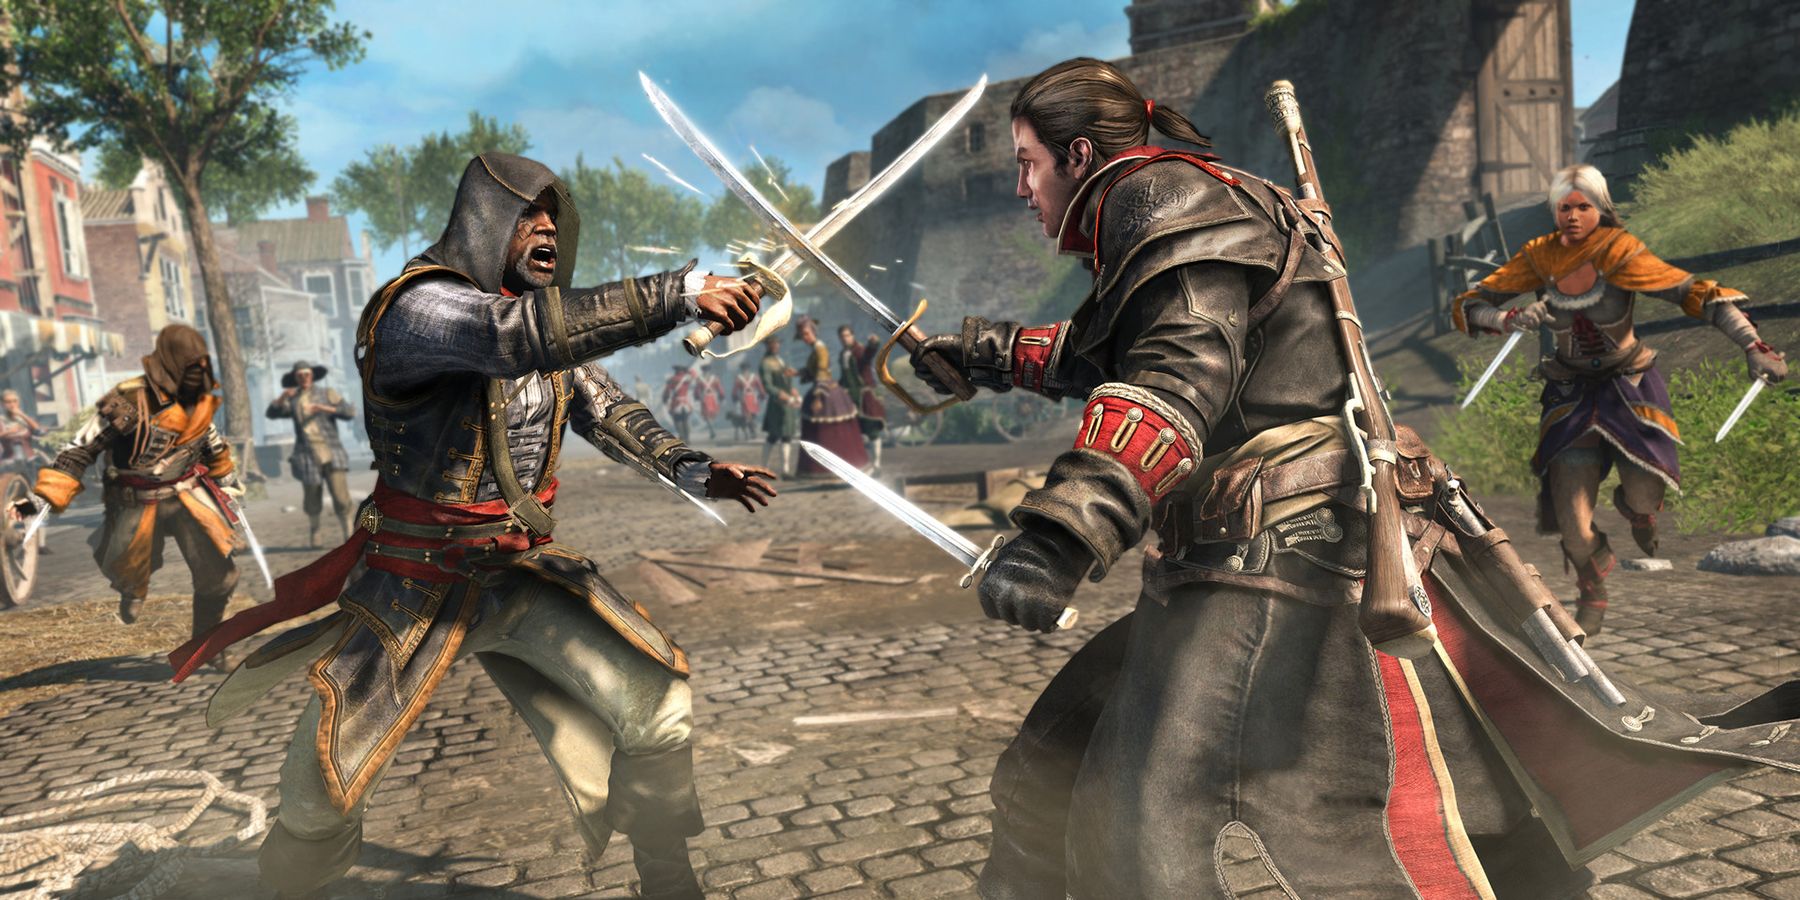 A swordfight in Assassin's Creed Rogue